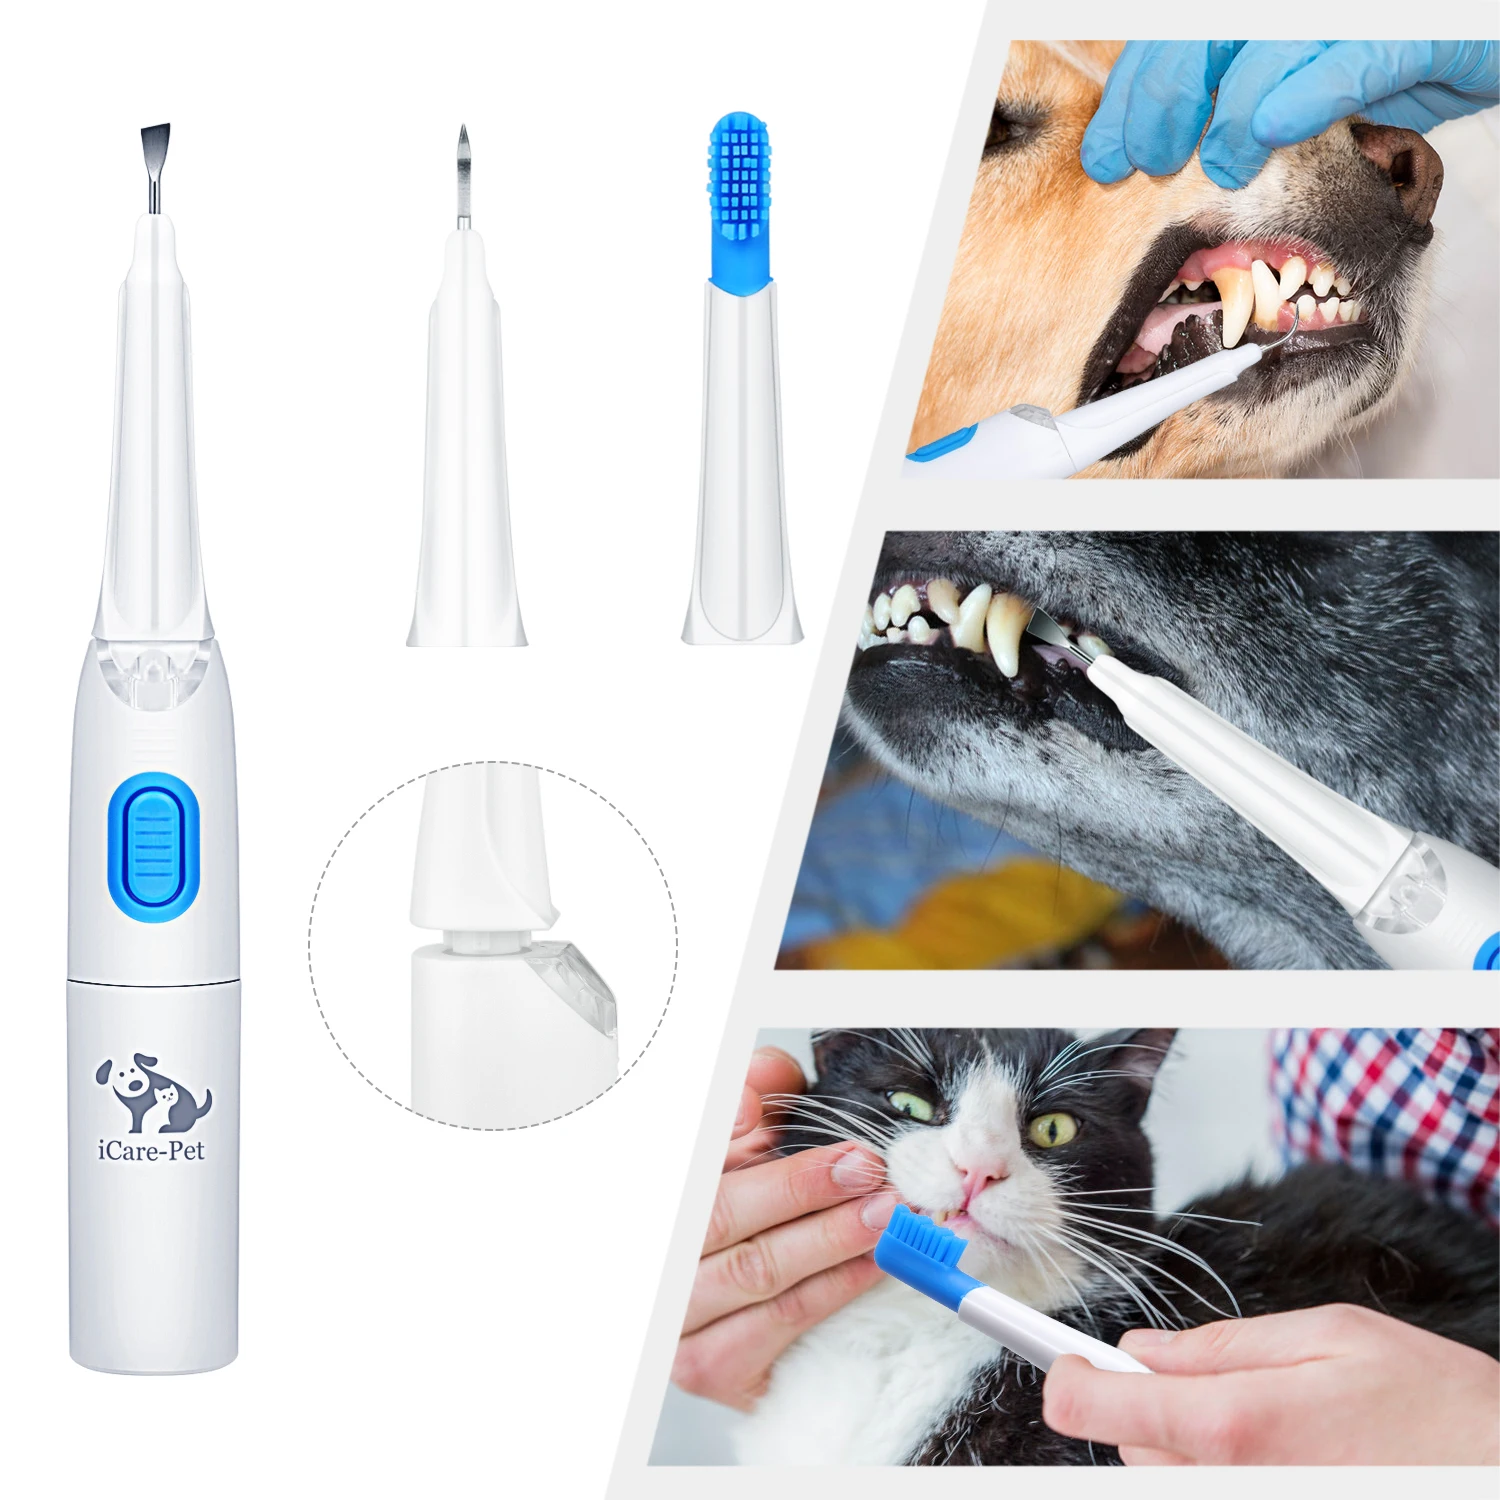 Dog Toothbrush Pet Ultrasonic Dental Calculus Remover with 3 Tools for Home or Clinic Dog Electric Toothbrush